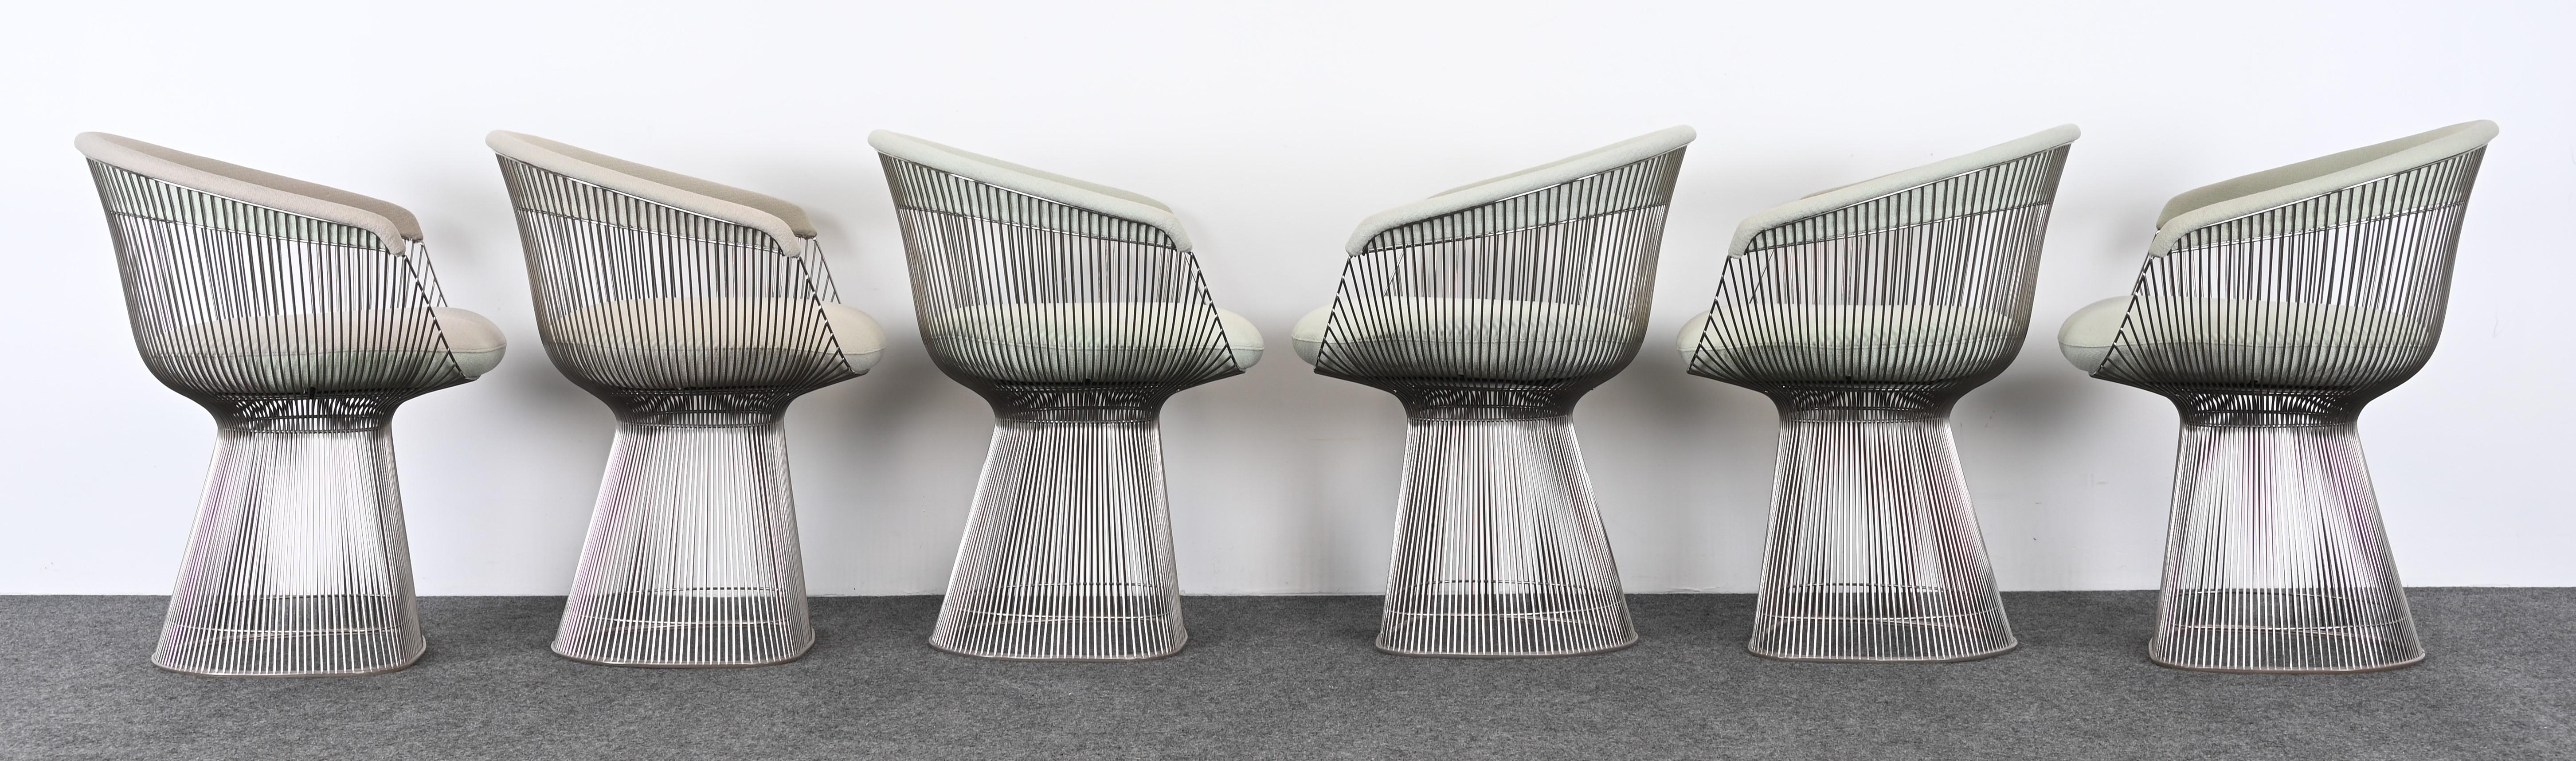 Set of Six Dining Chairs Designed by Warren Platner for Knoll, 20th Century For Sale 1